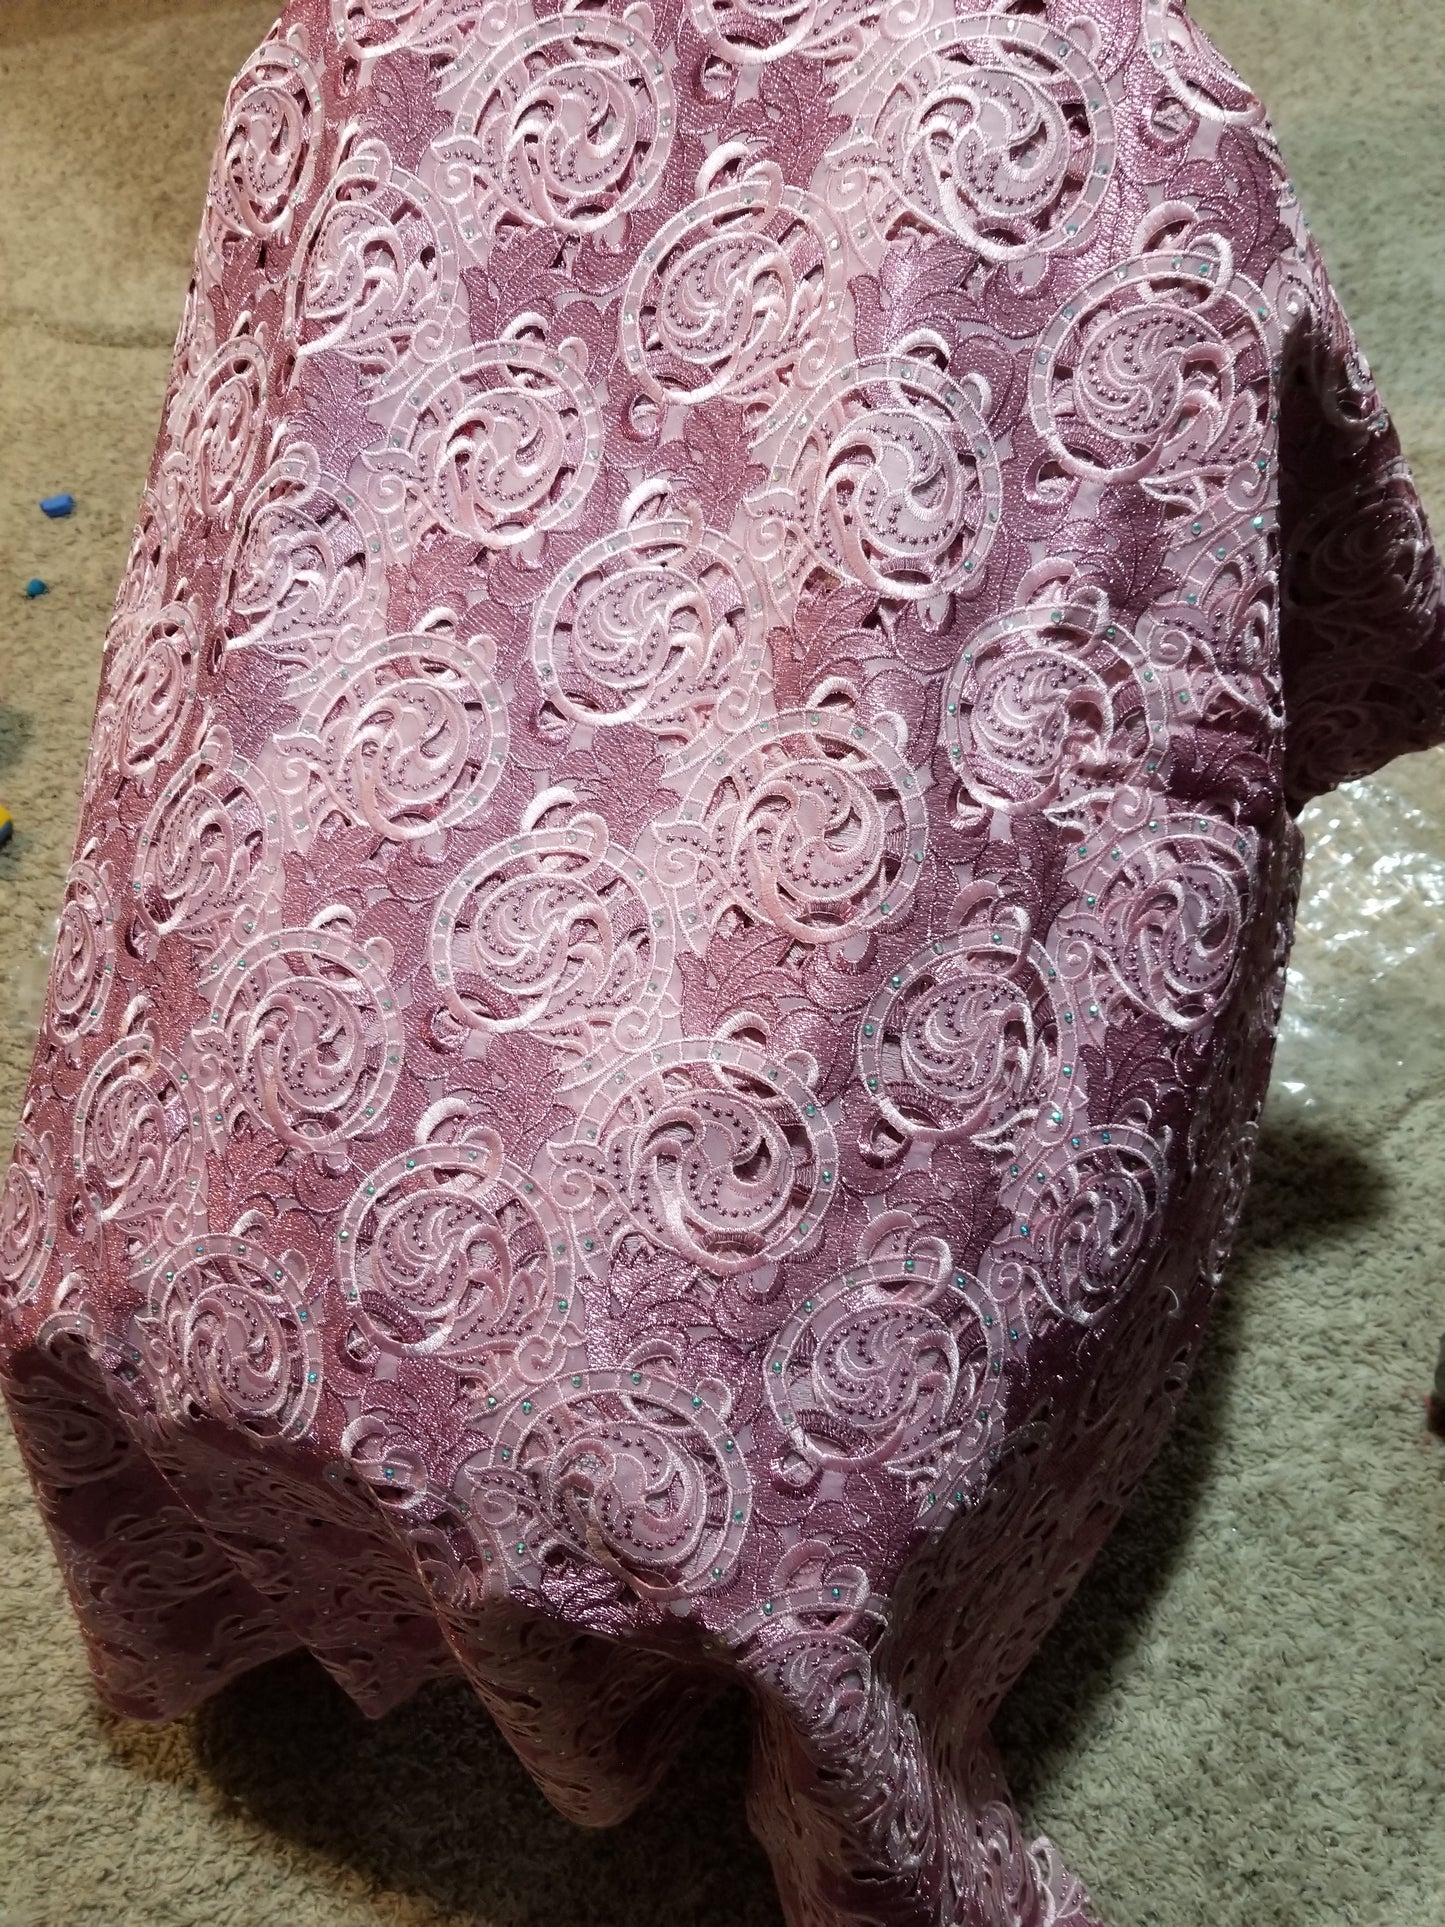 Original quality Organza Swiss lace fabric for making Nigerian outfit. Classic lace for big Nigerian event.Sold as 5yds., price is for 5yds. Beautiful pink,  hand cut organza swiss lace